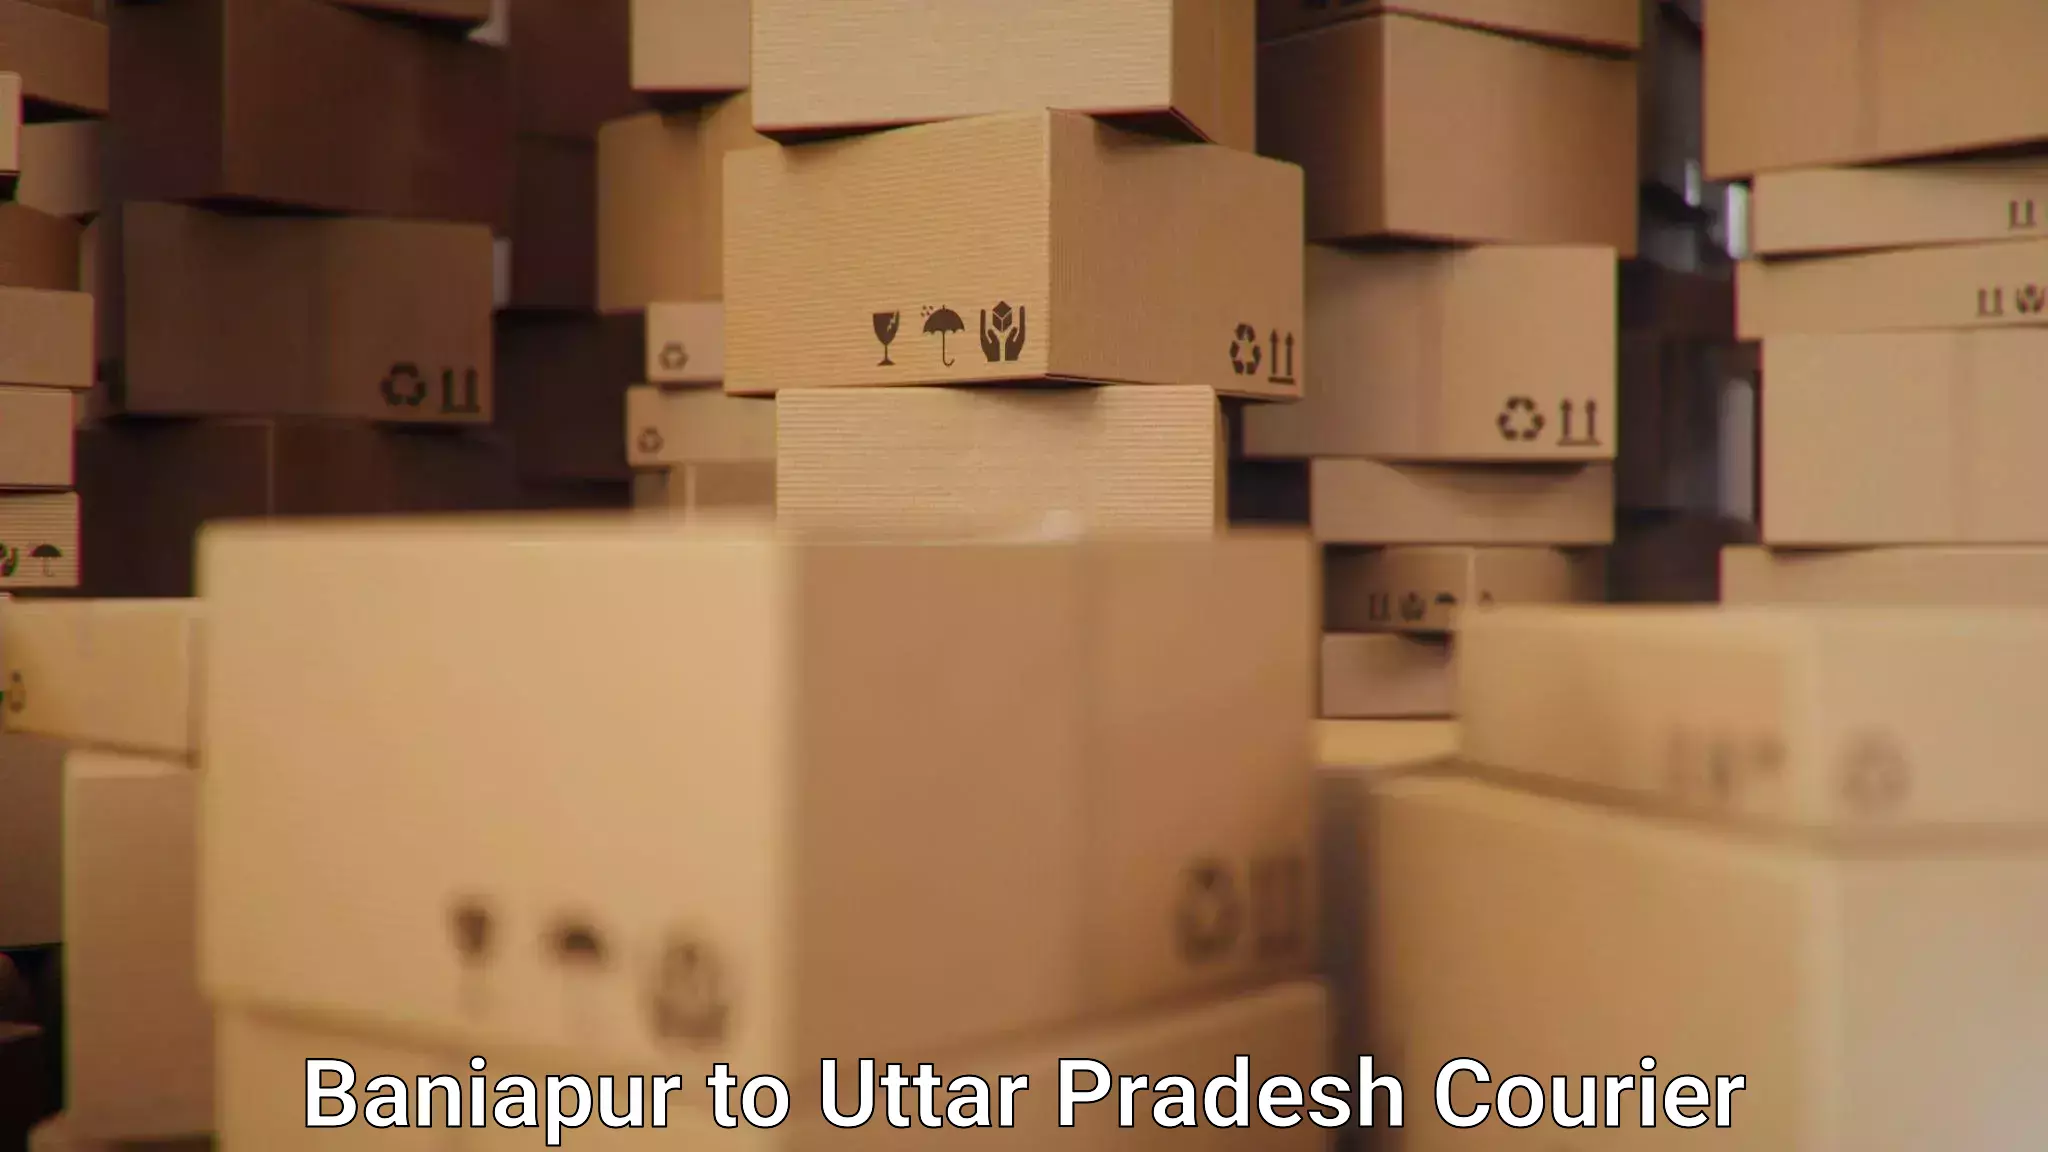 State-of-the-art courier technology in Baniapur to Mathura